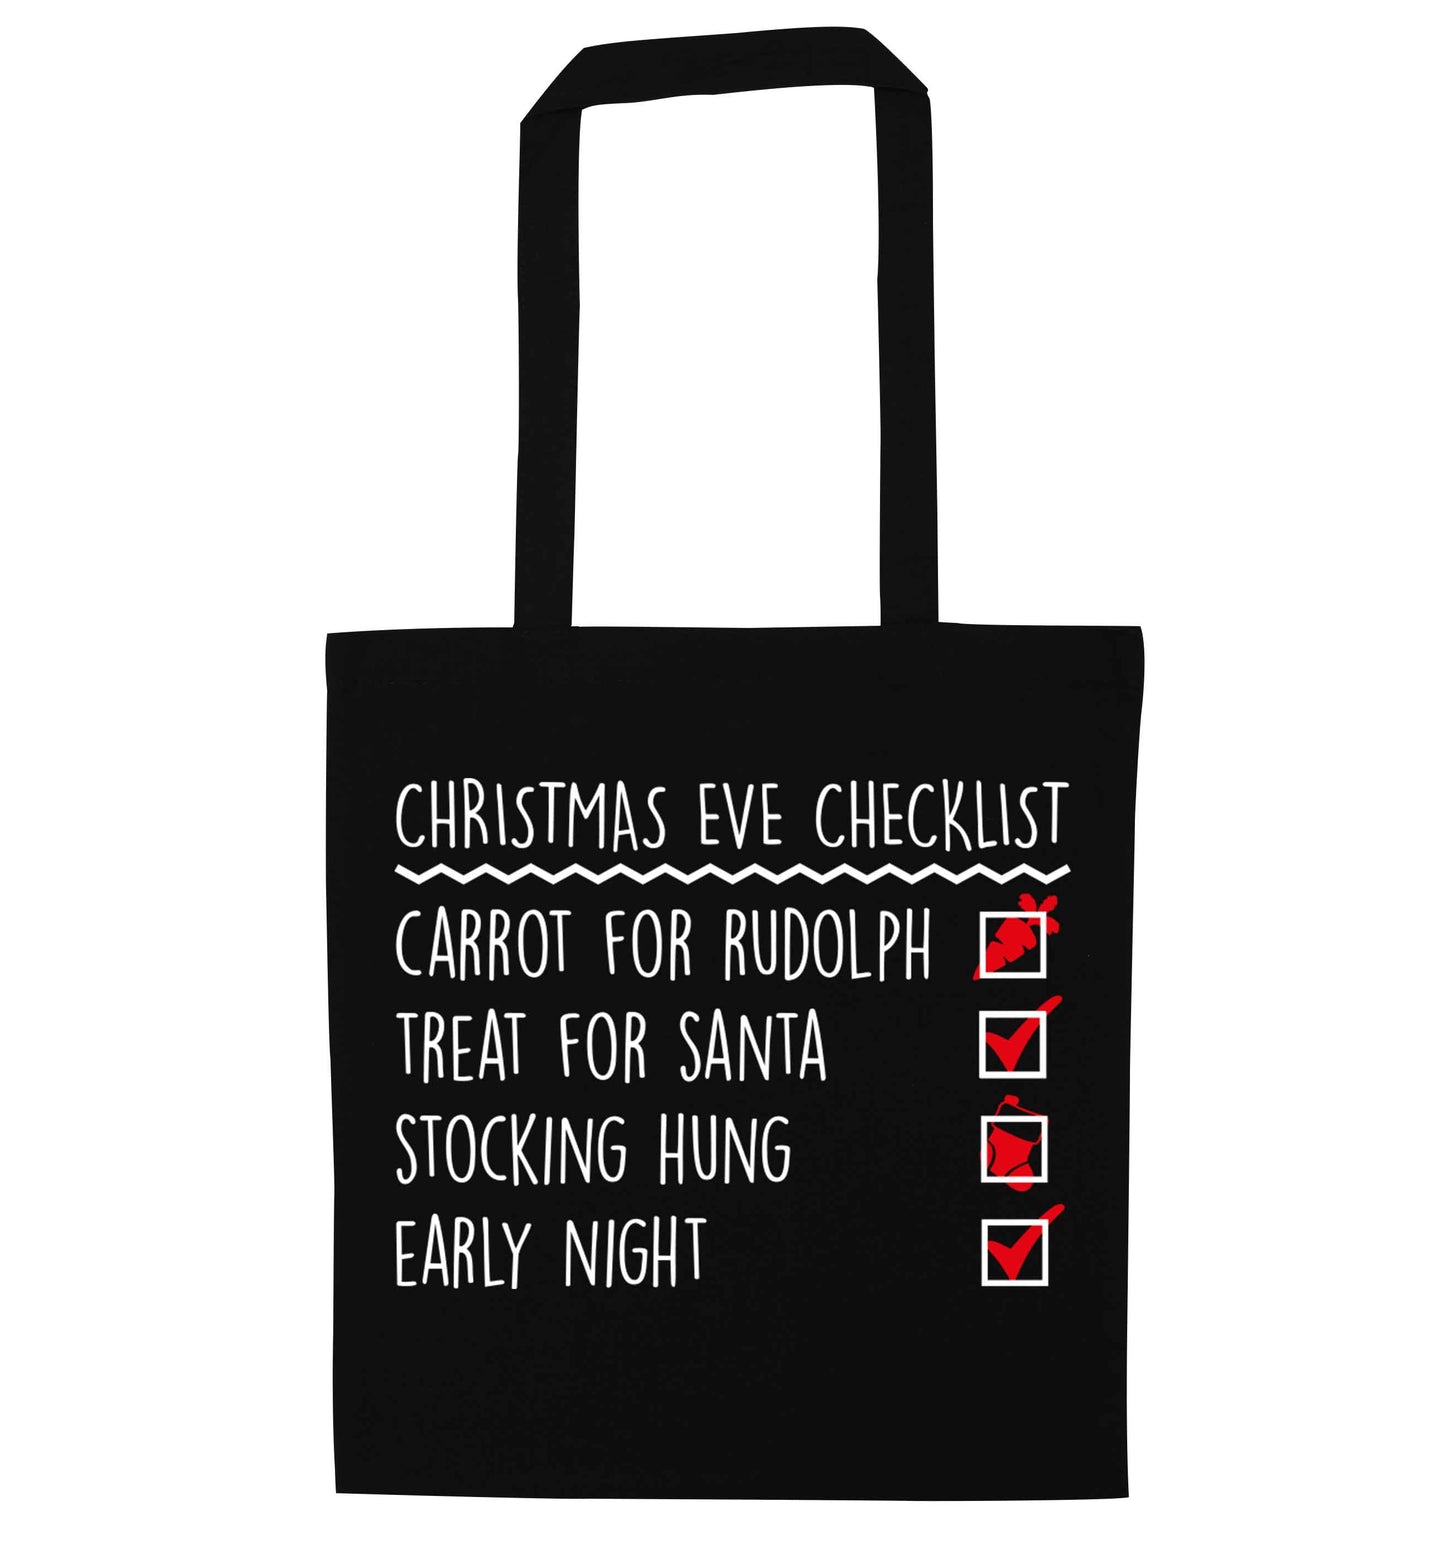 Candy Canes Candy Corns black tote bag